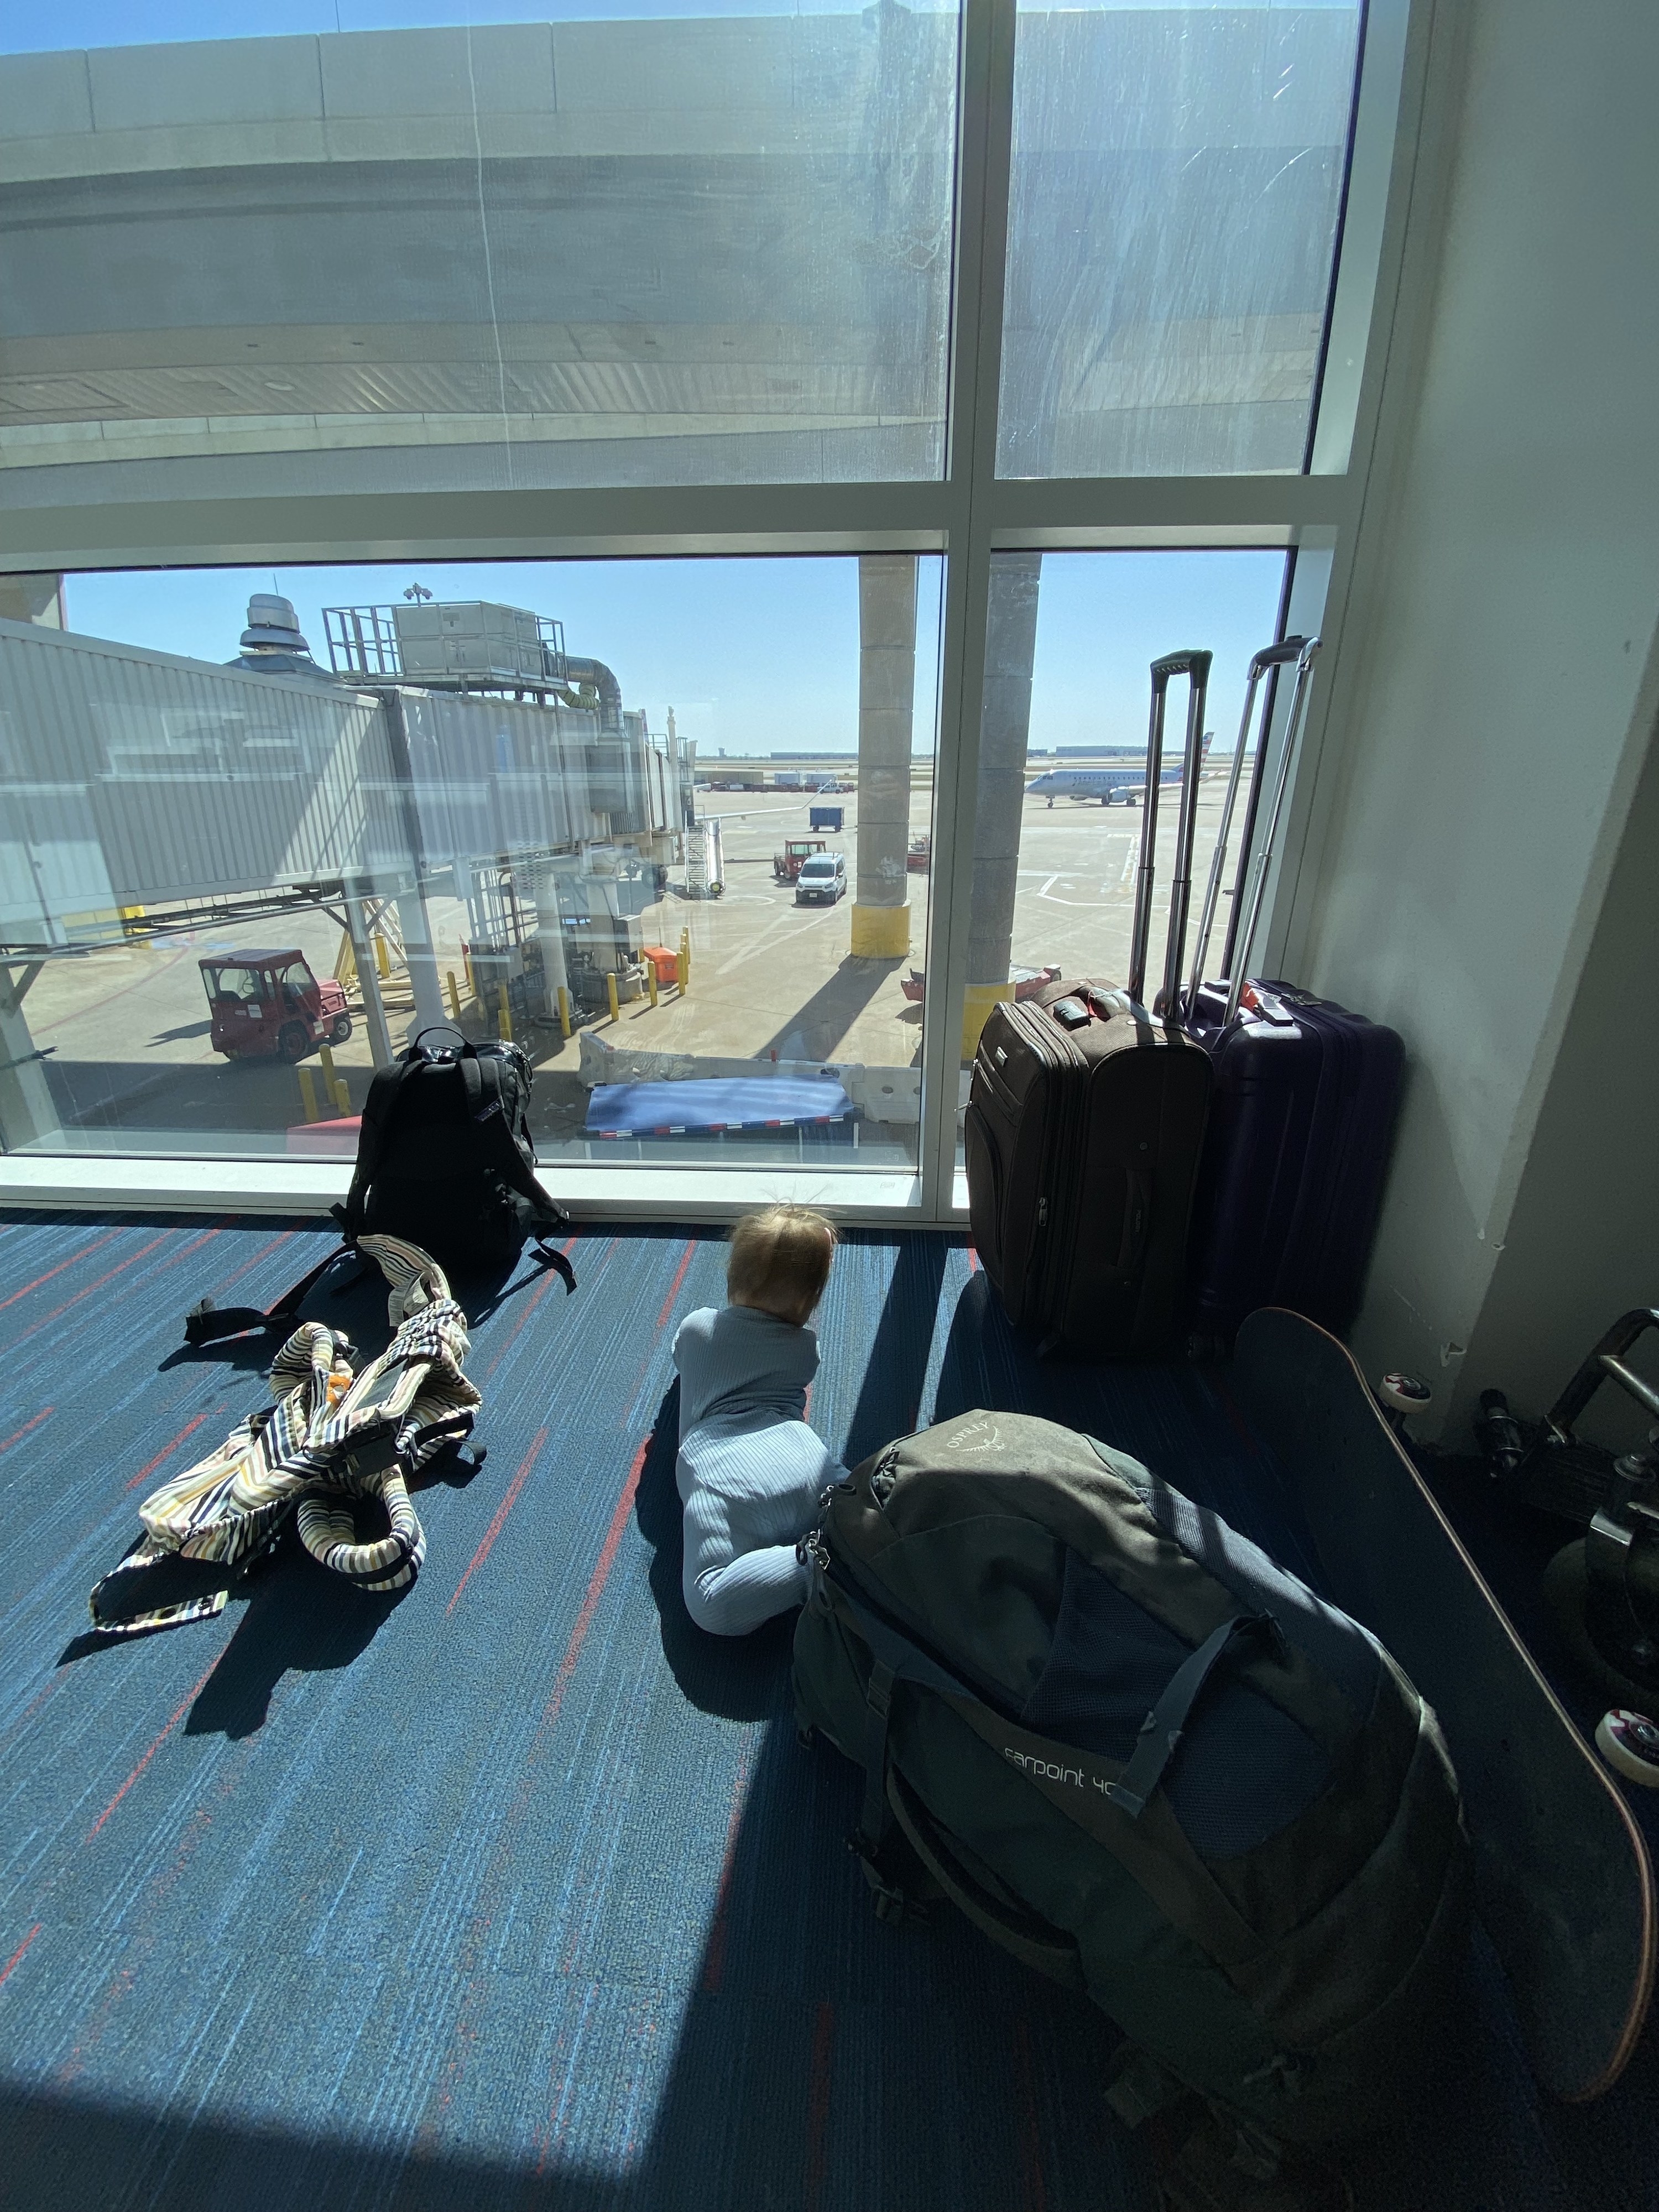 Baby on the floor of an airport with bags